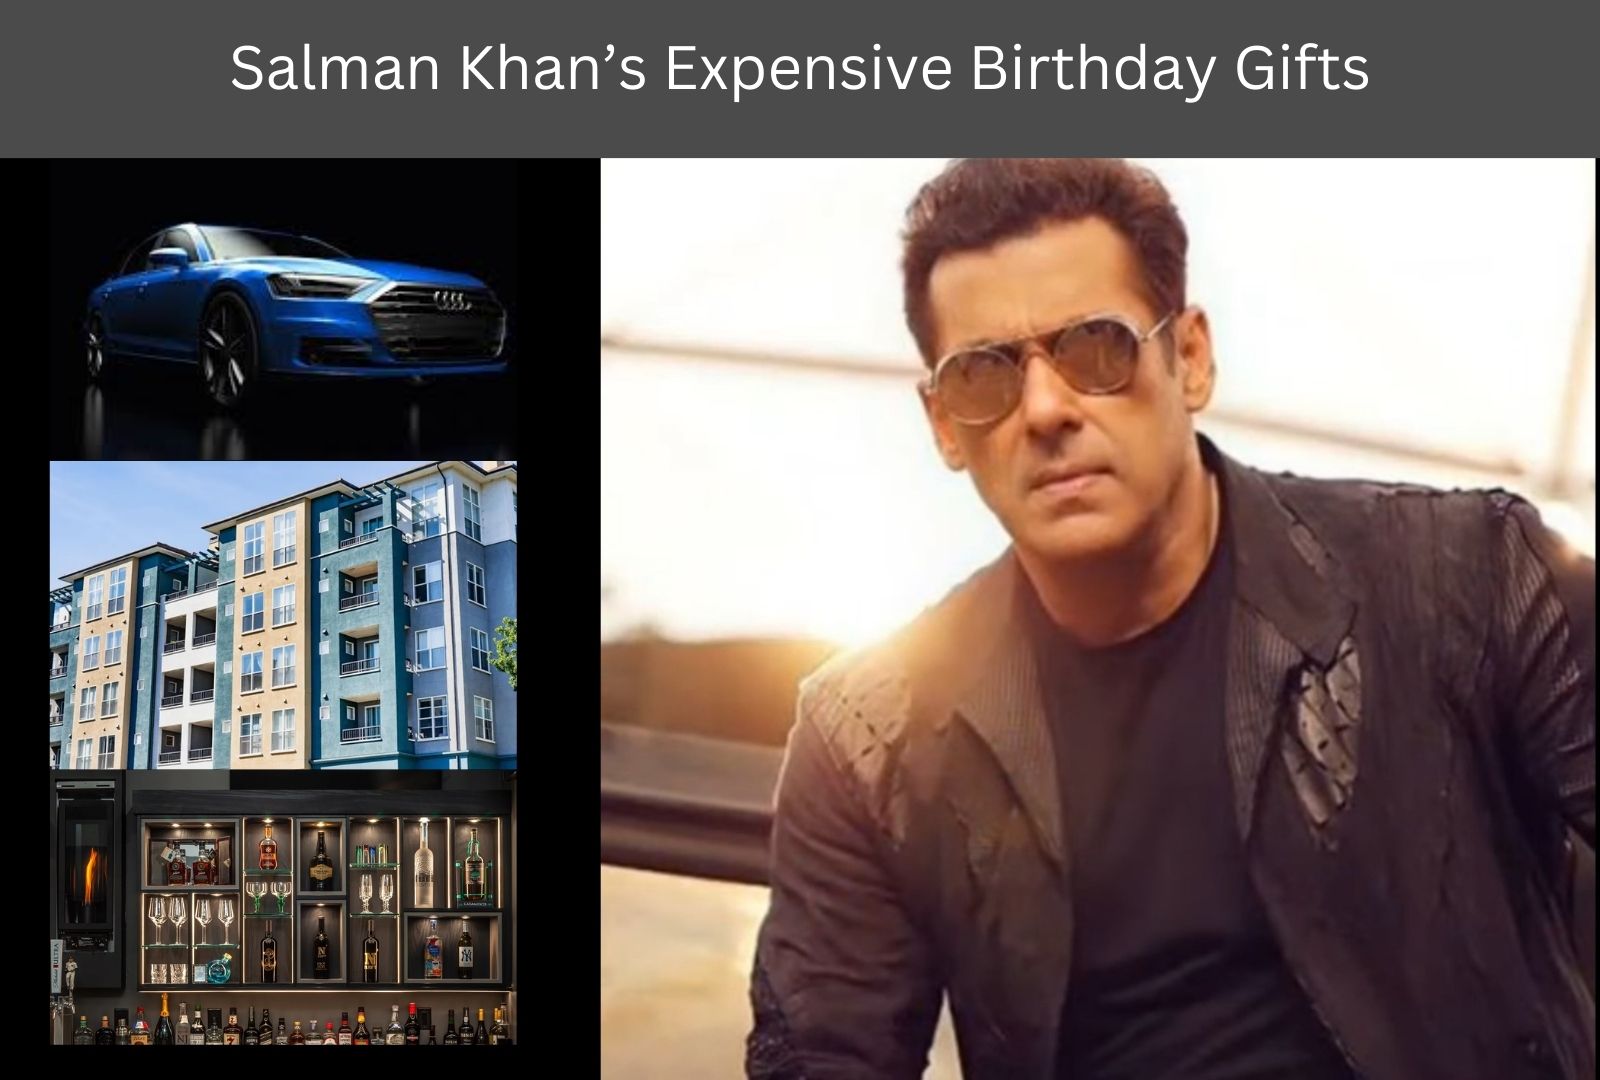 The Most Expensive Gifts on Salman Khan's 58th Birthday